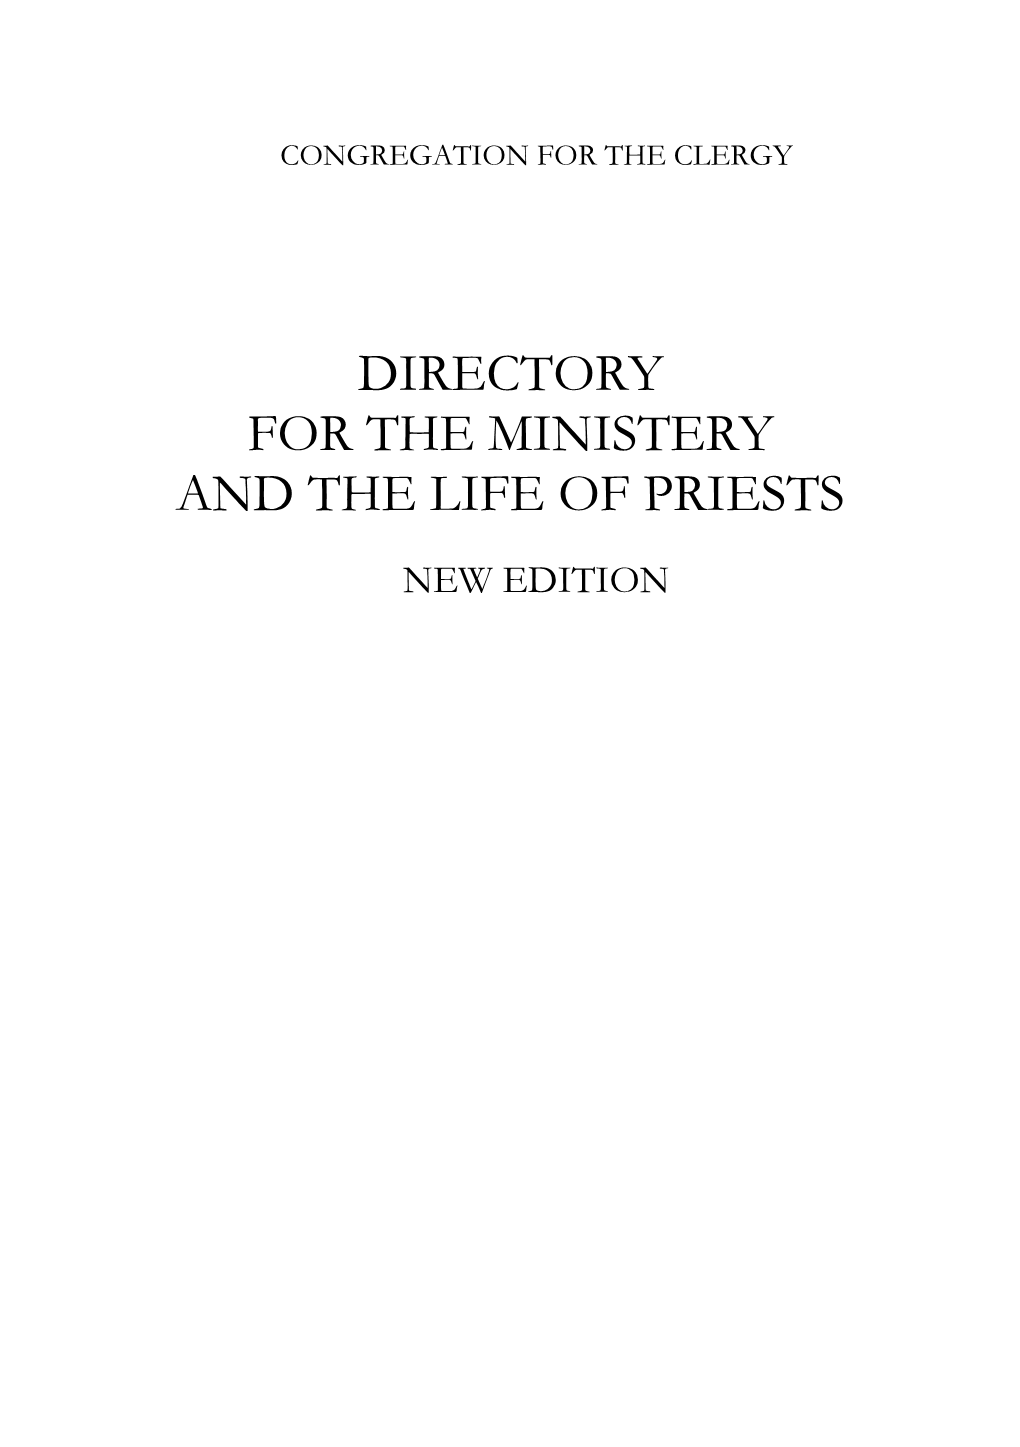 Directory for the Ministry and Life of Priests